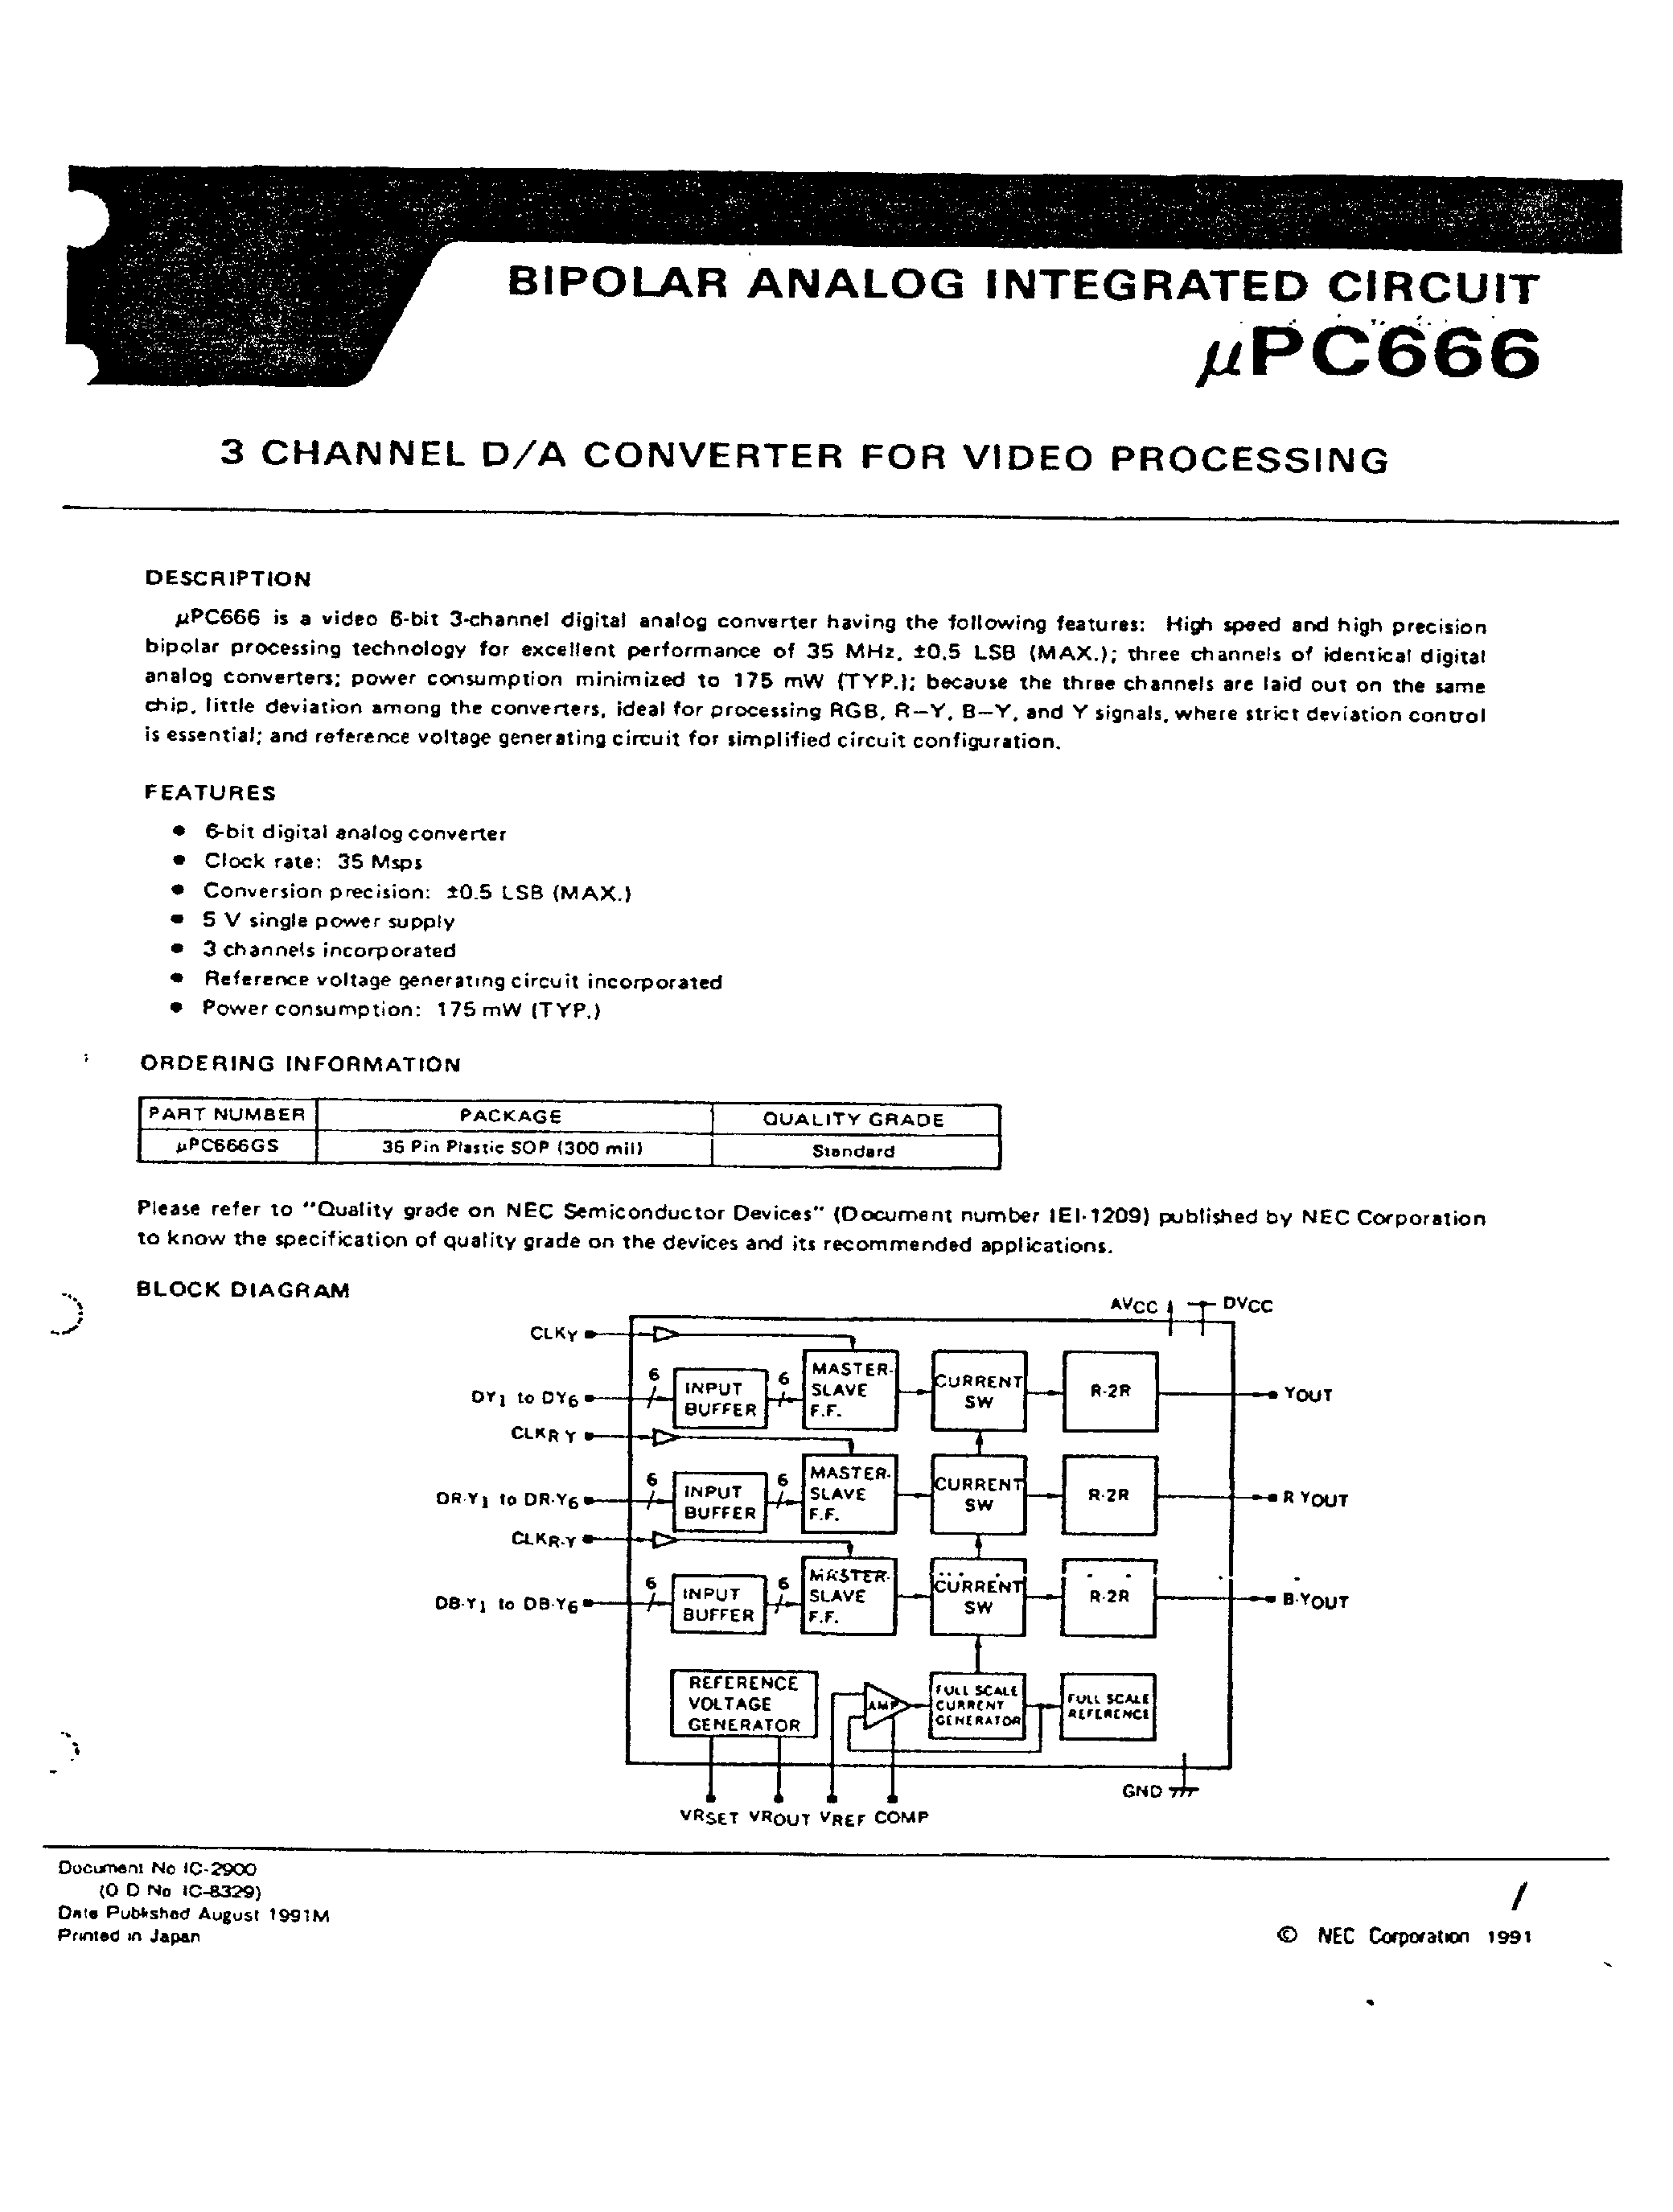 Datasheet UPC666 - 3 CHANNEL D/A CONVERTER page 1